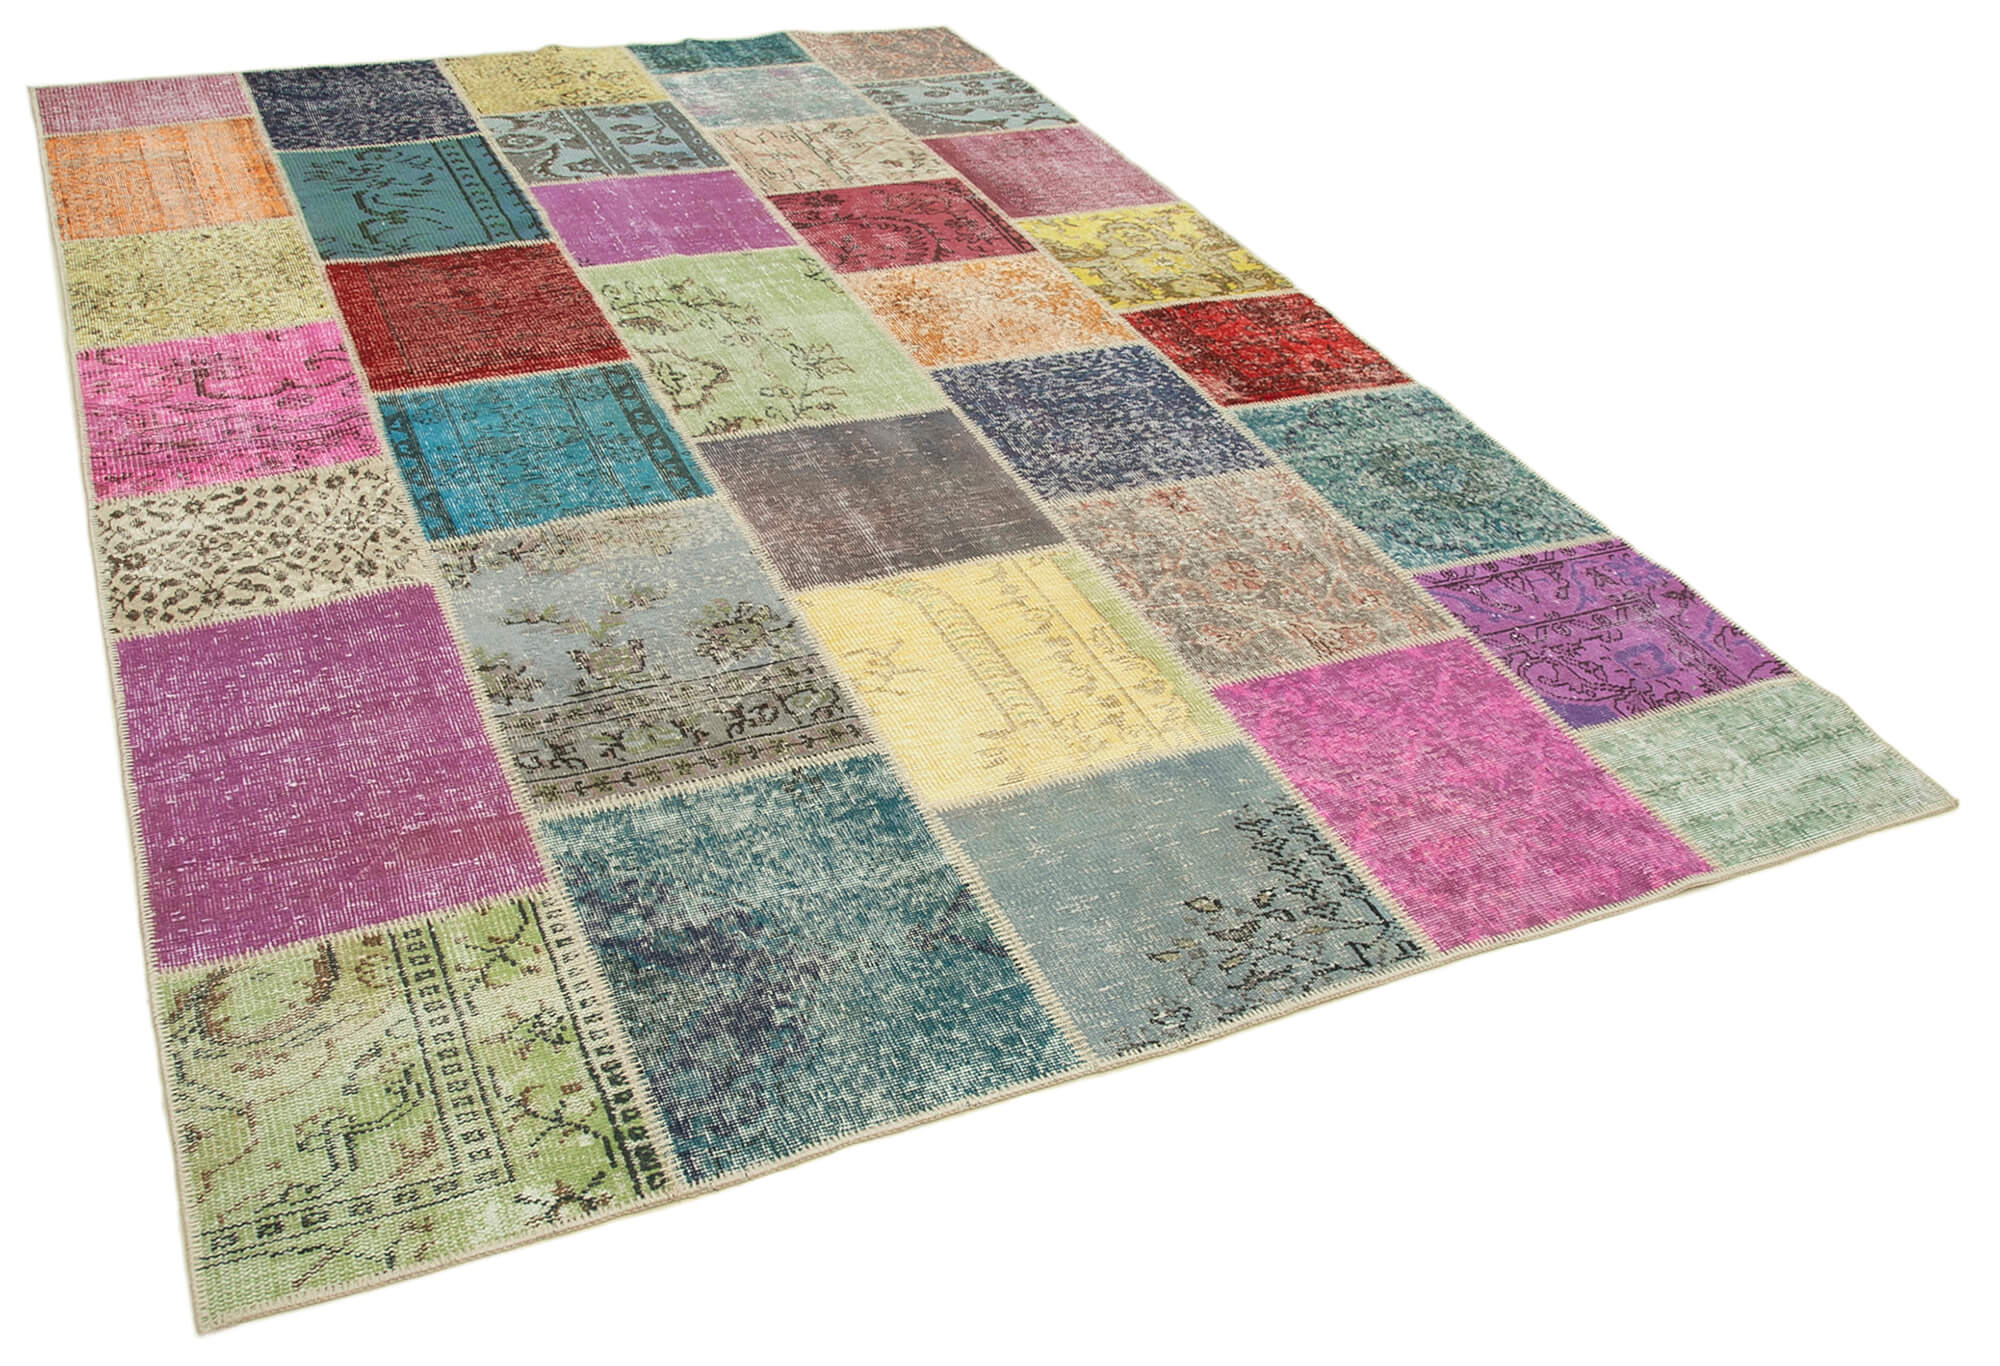 7x10 Multicolor Overdyed Wool Patchwork Area Rug -9362